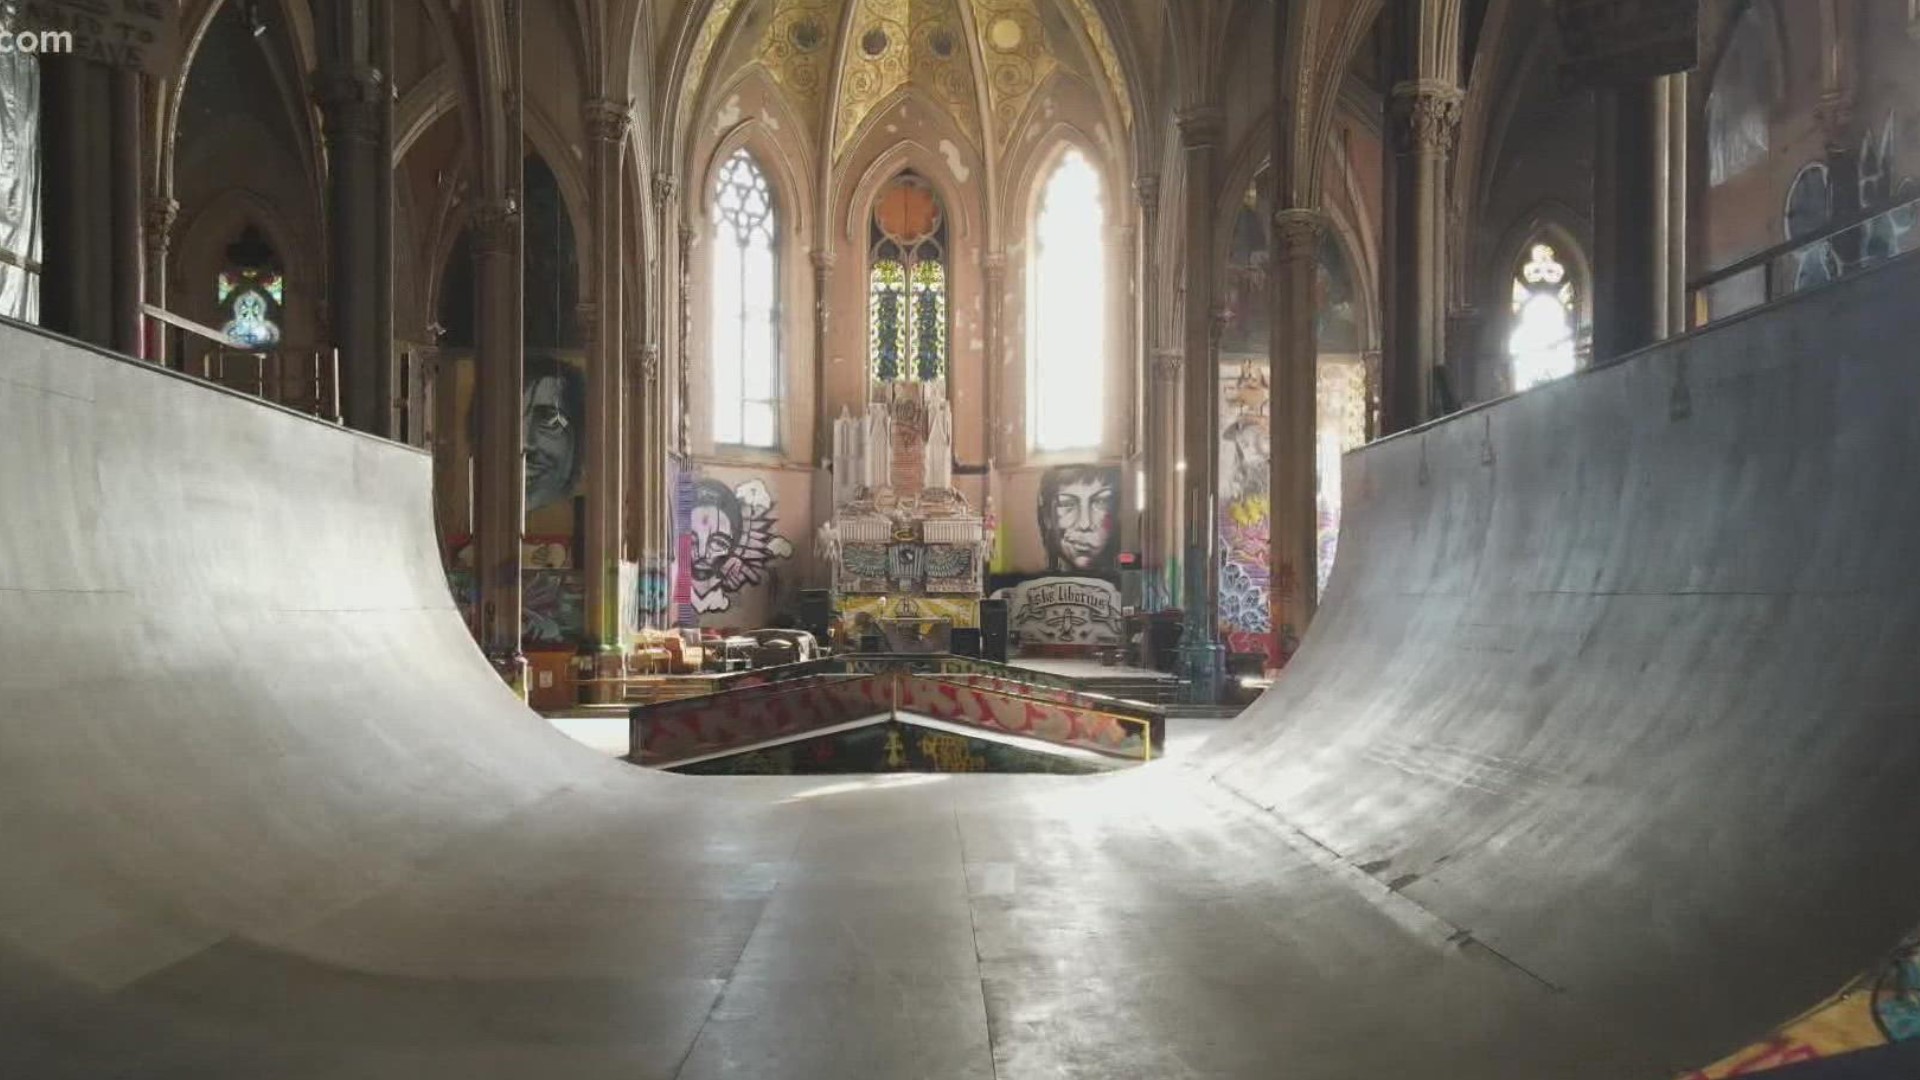 There’s an effort in St. Louis to bring new life to old places. If you walk through the doors of a church built in the 1800s, you’ll find a colorful skate park.